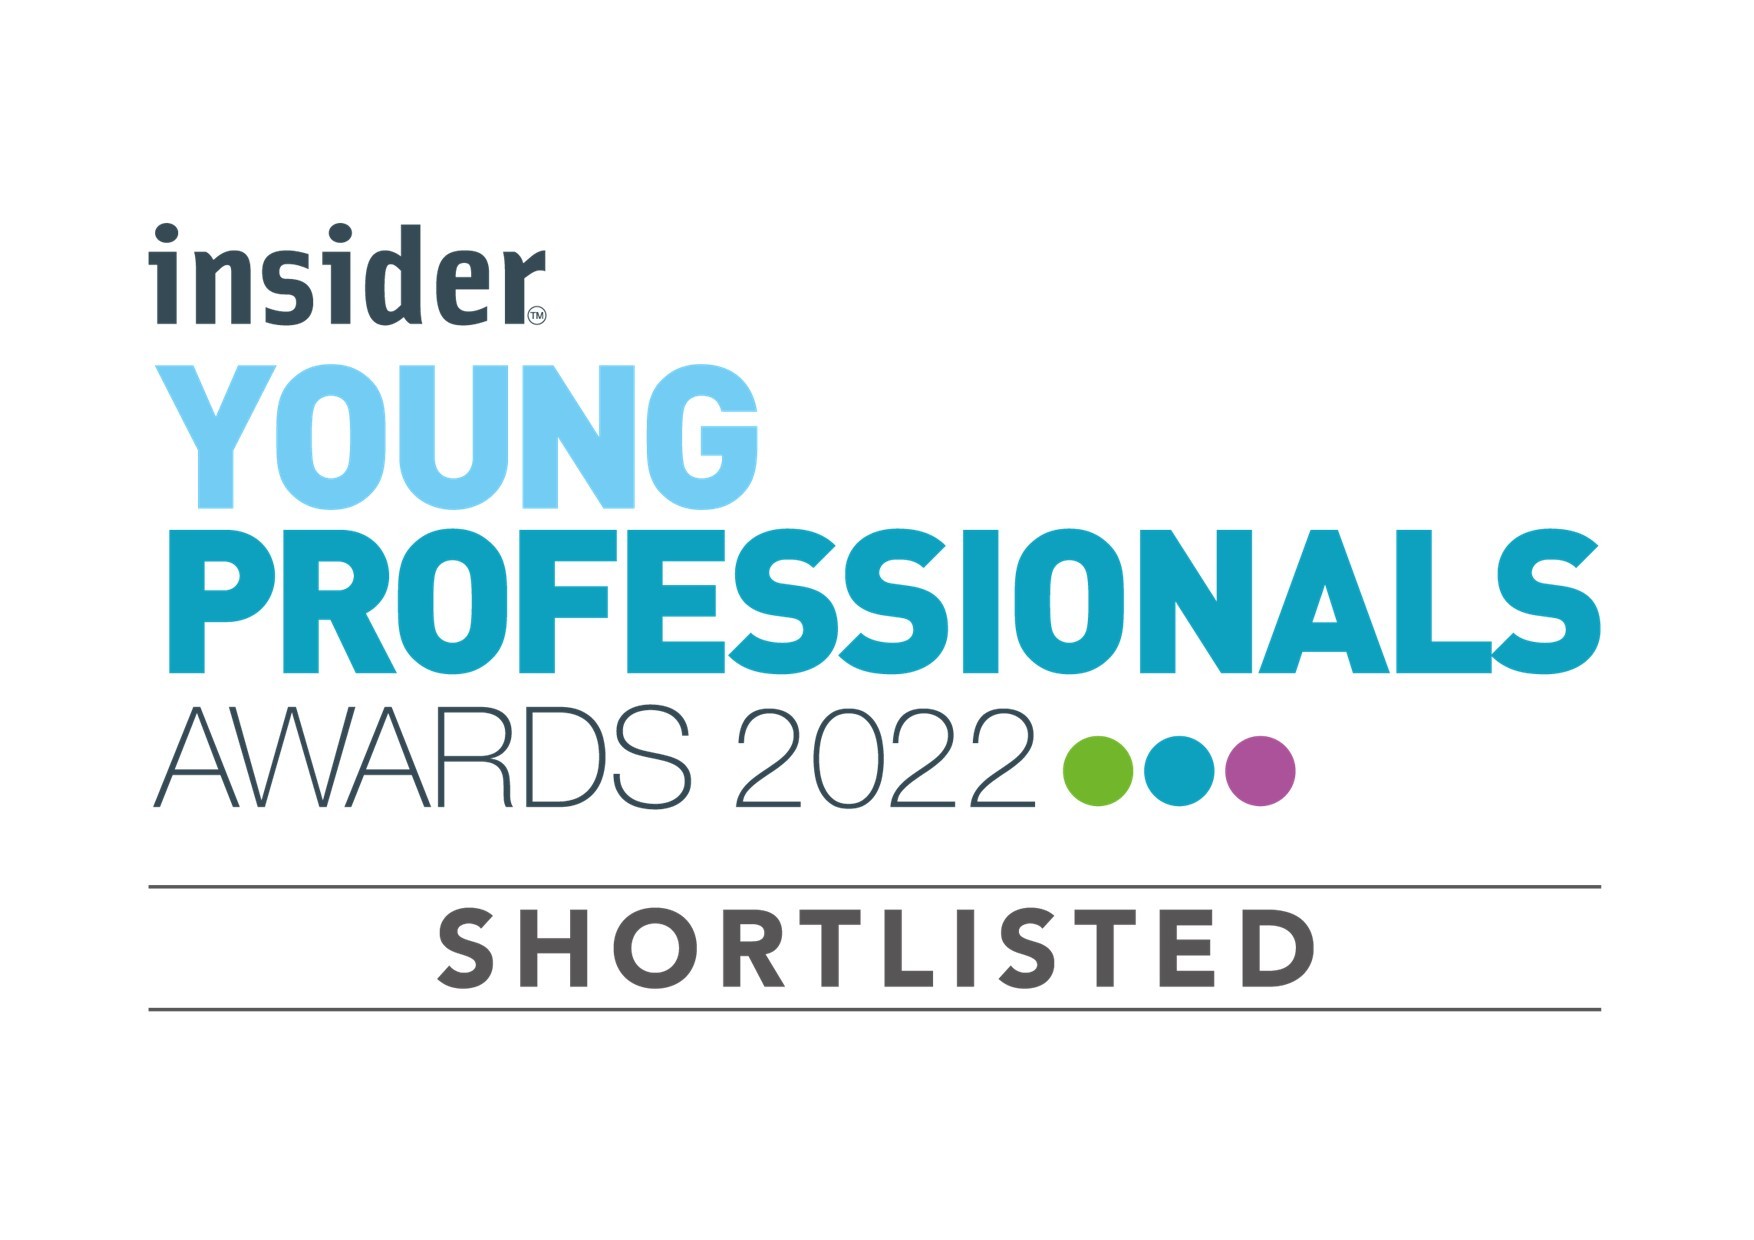 Insider Young Professionals Award 22 shortlisted